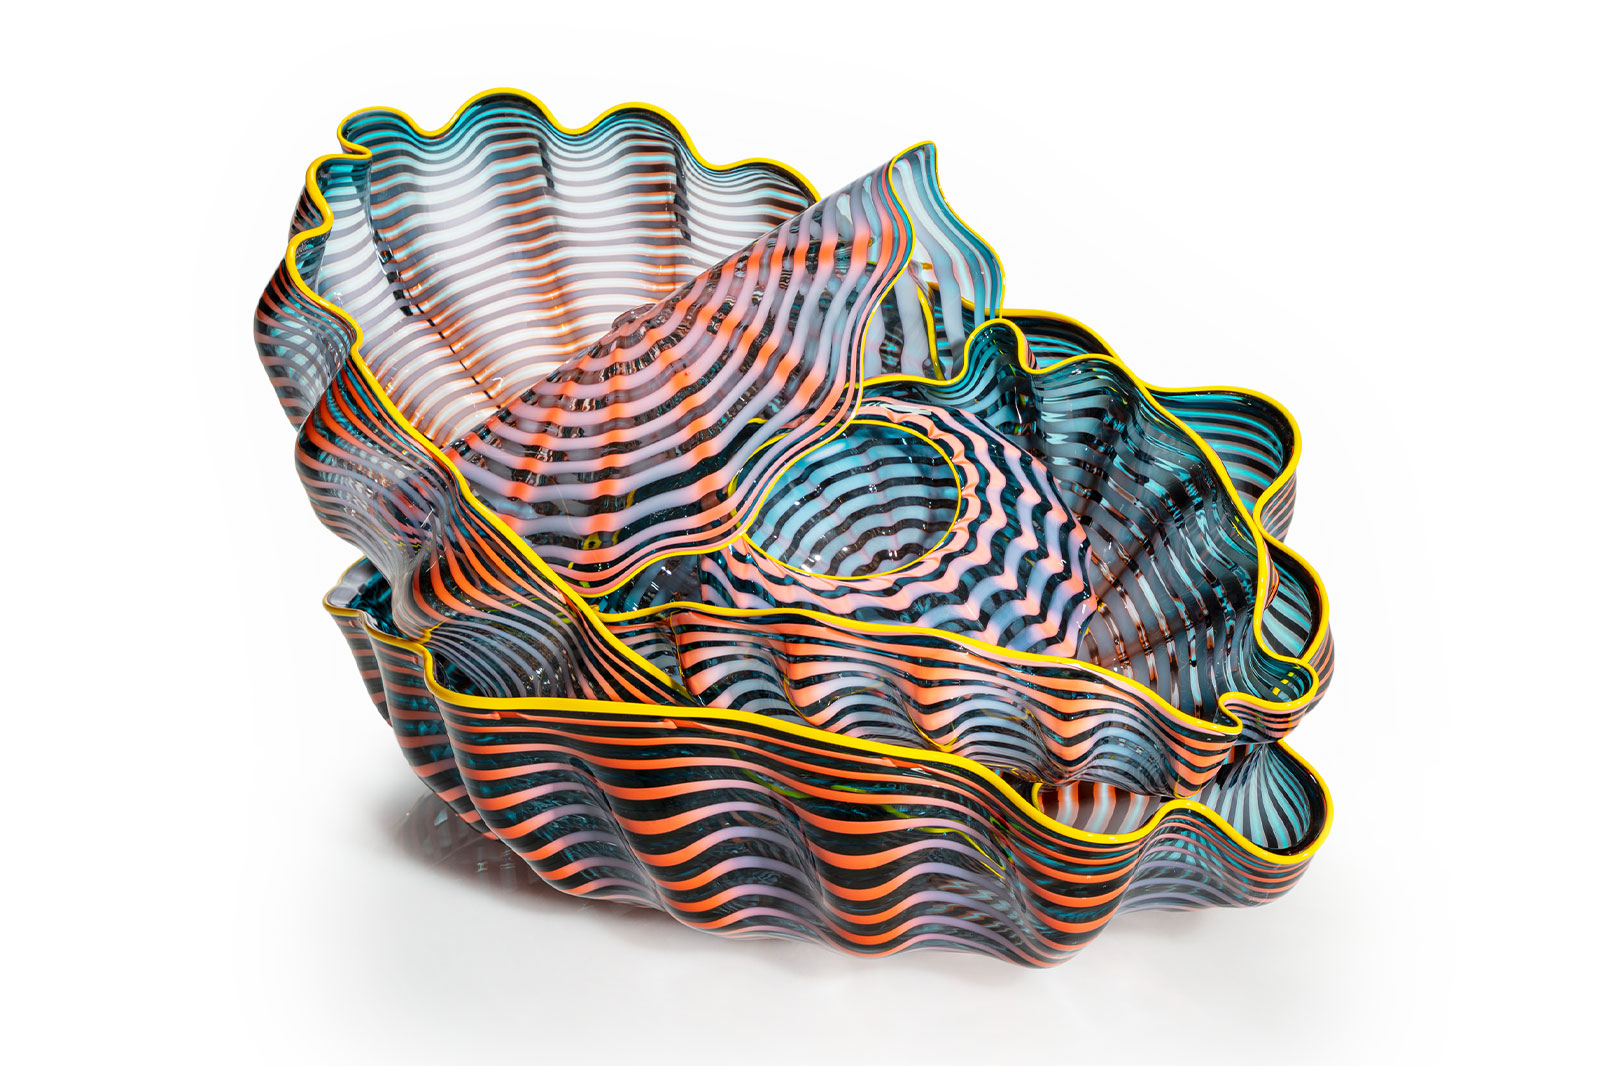 Salmon Blue Seaform Set with Bright Sun Lip Wraps, 2001, by Dale Chihuly